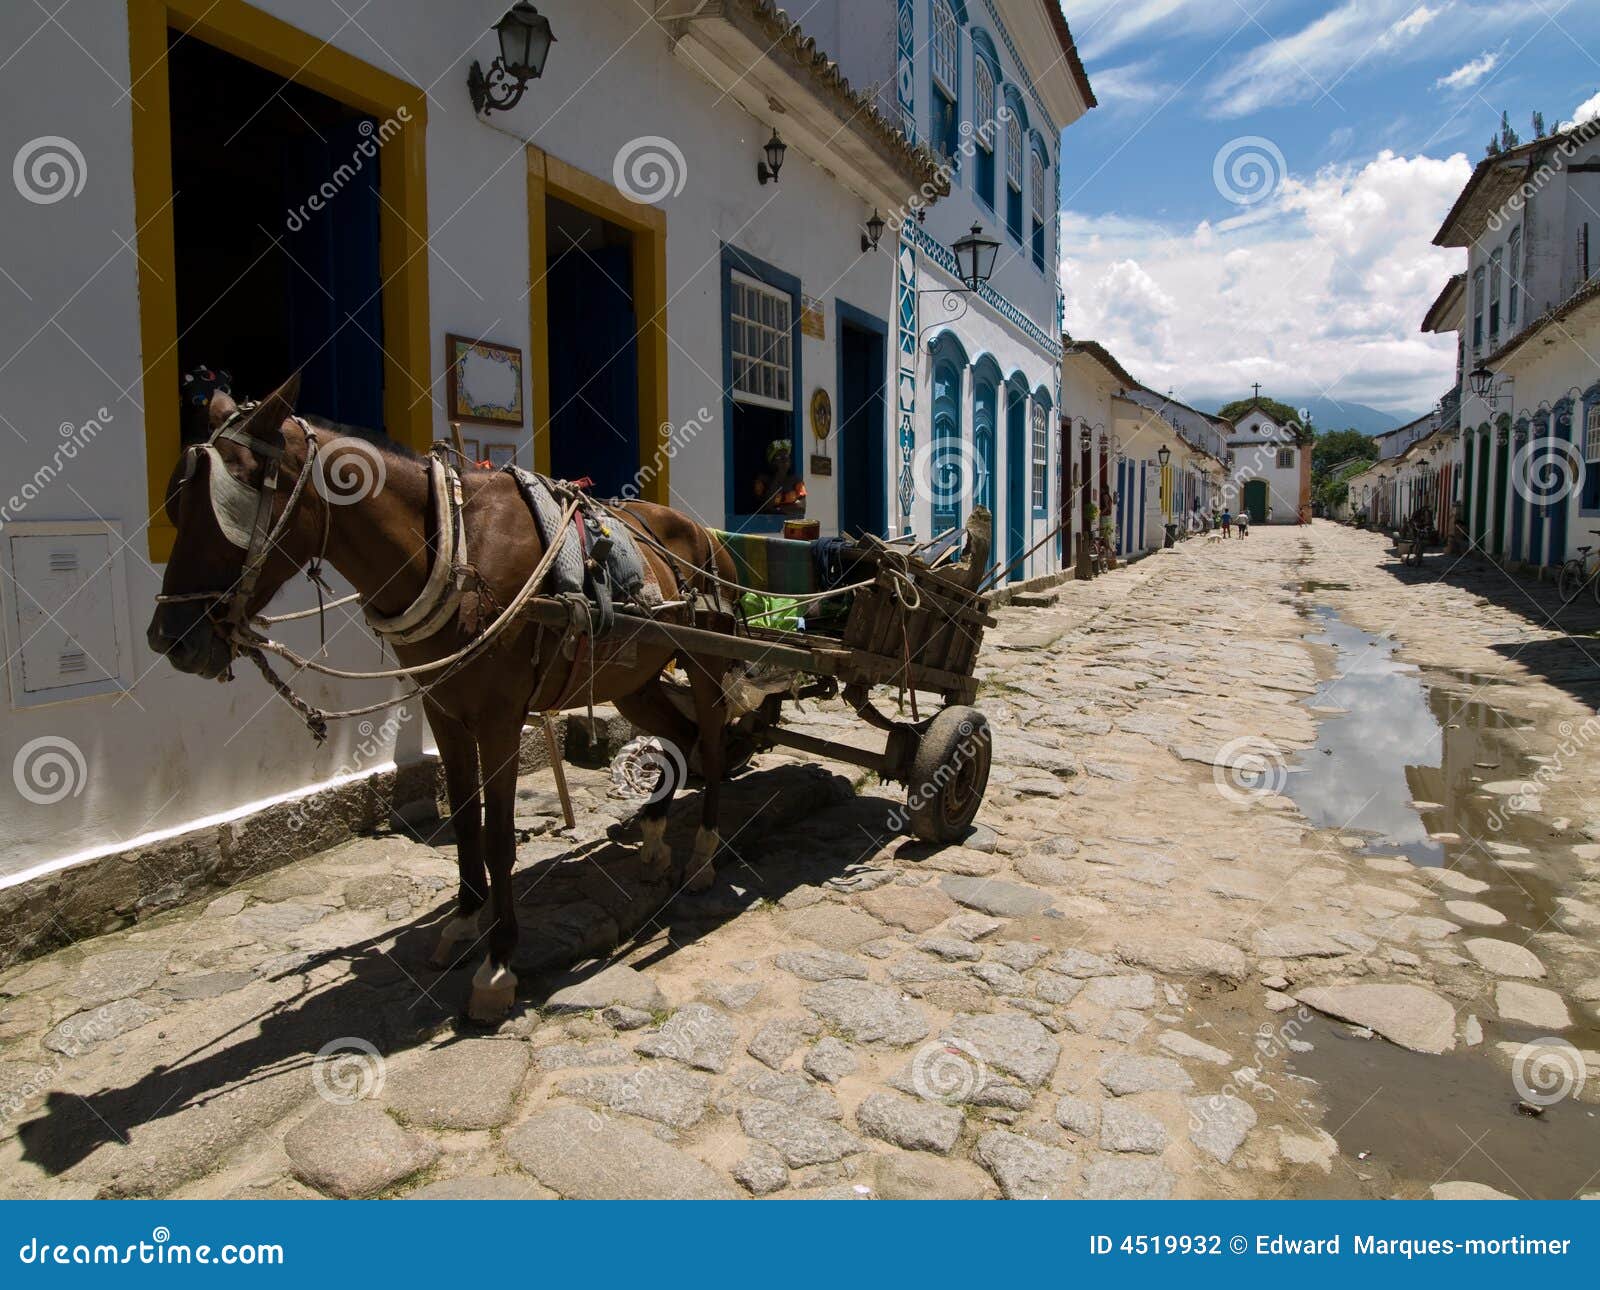 horse and cart, paraty, brazil.